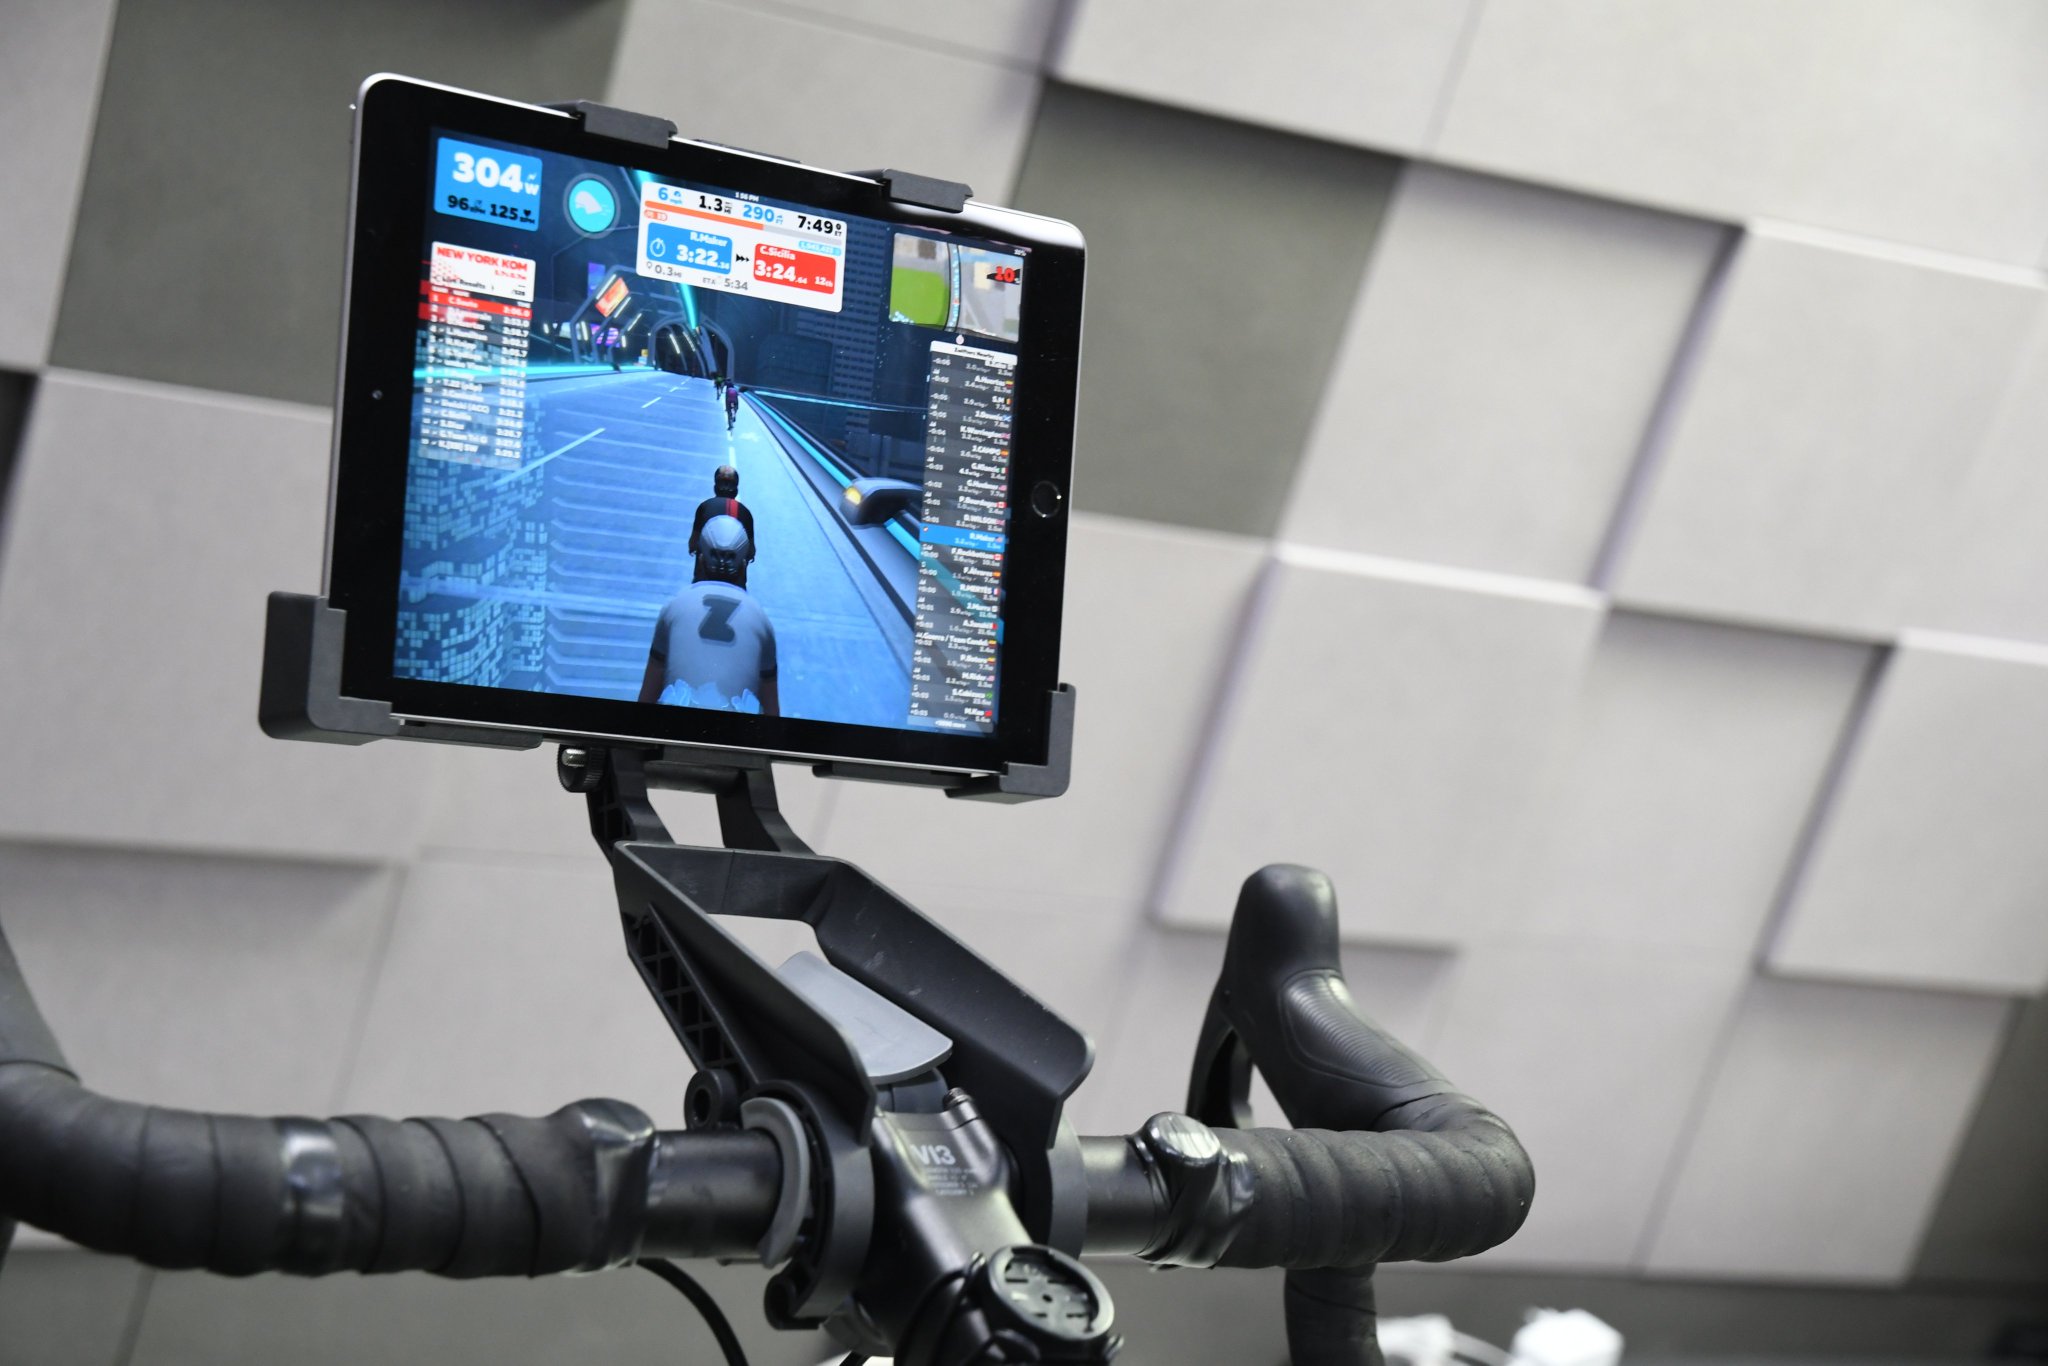 Tacx Handlebar Tablet Holder Accessory In-Depth Review